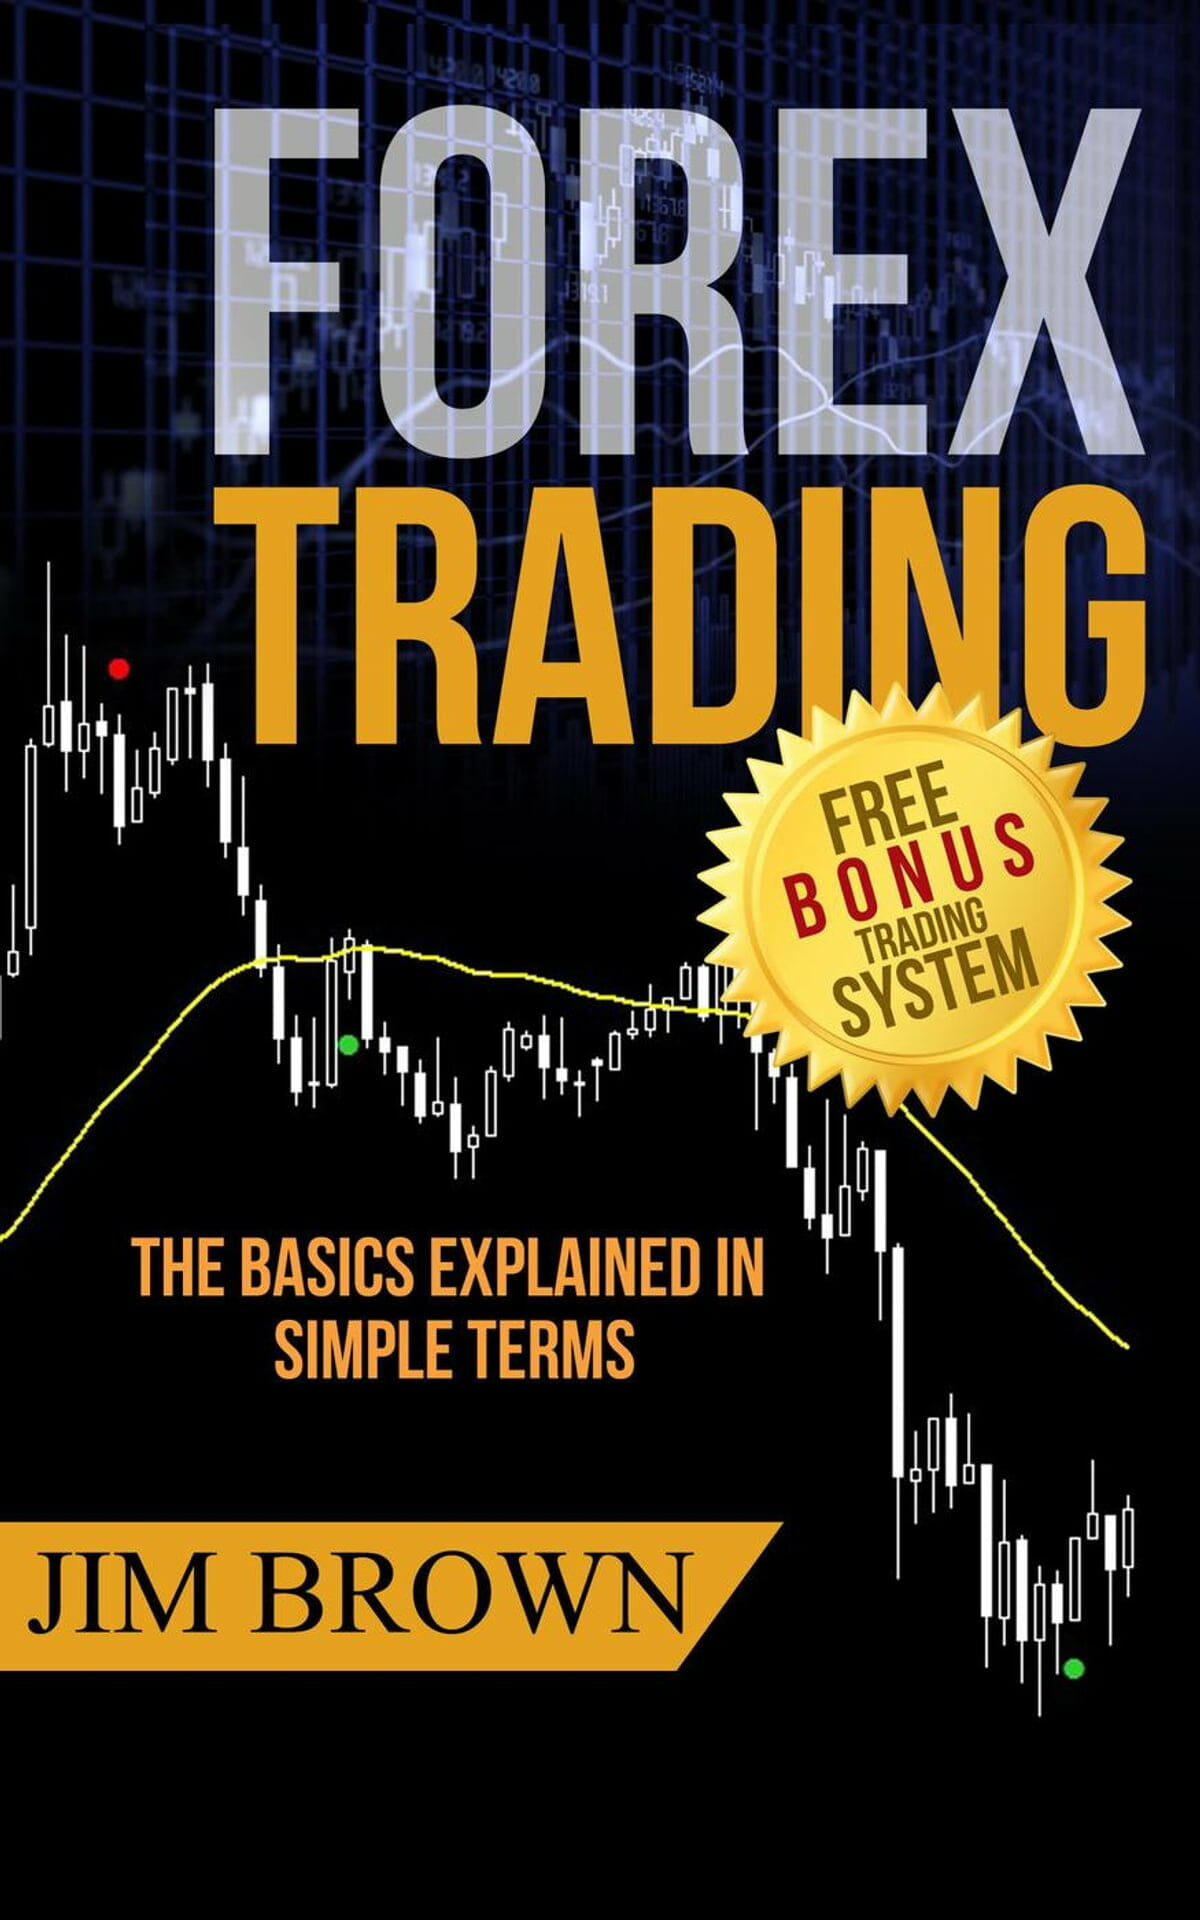 Forex Trading: The Basics Explained in Simple Terms